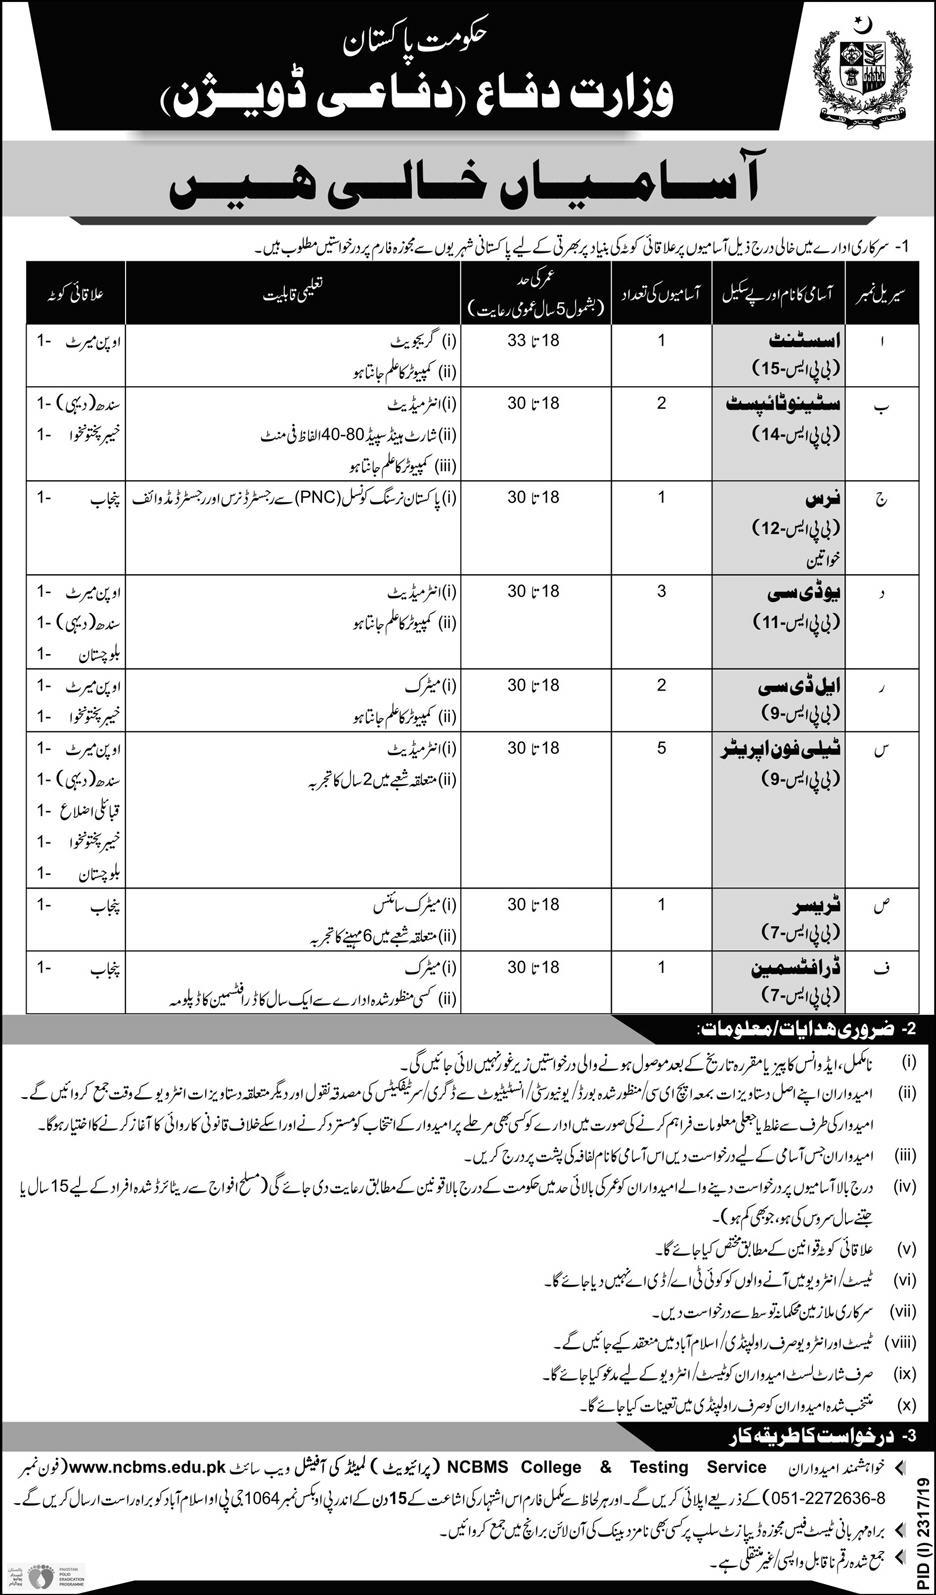 Jobs in Ministry of Defence